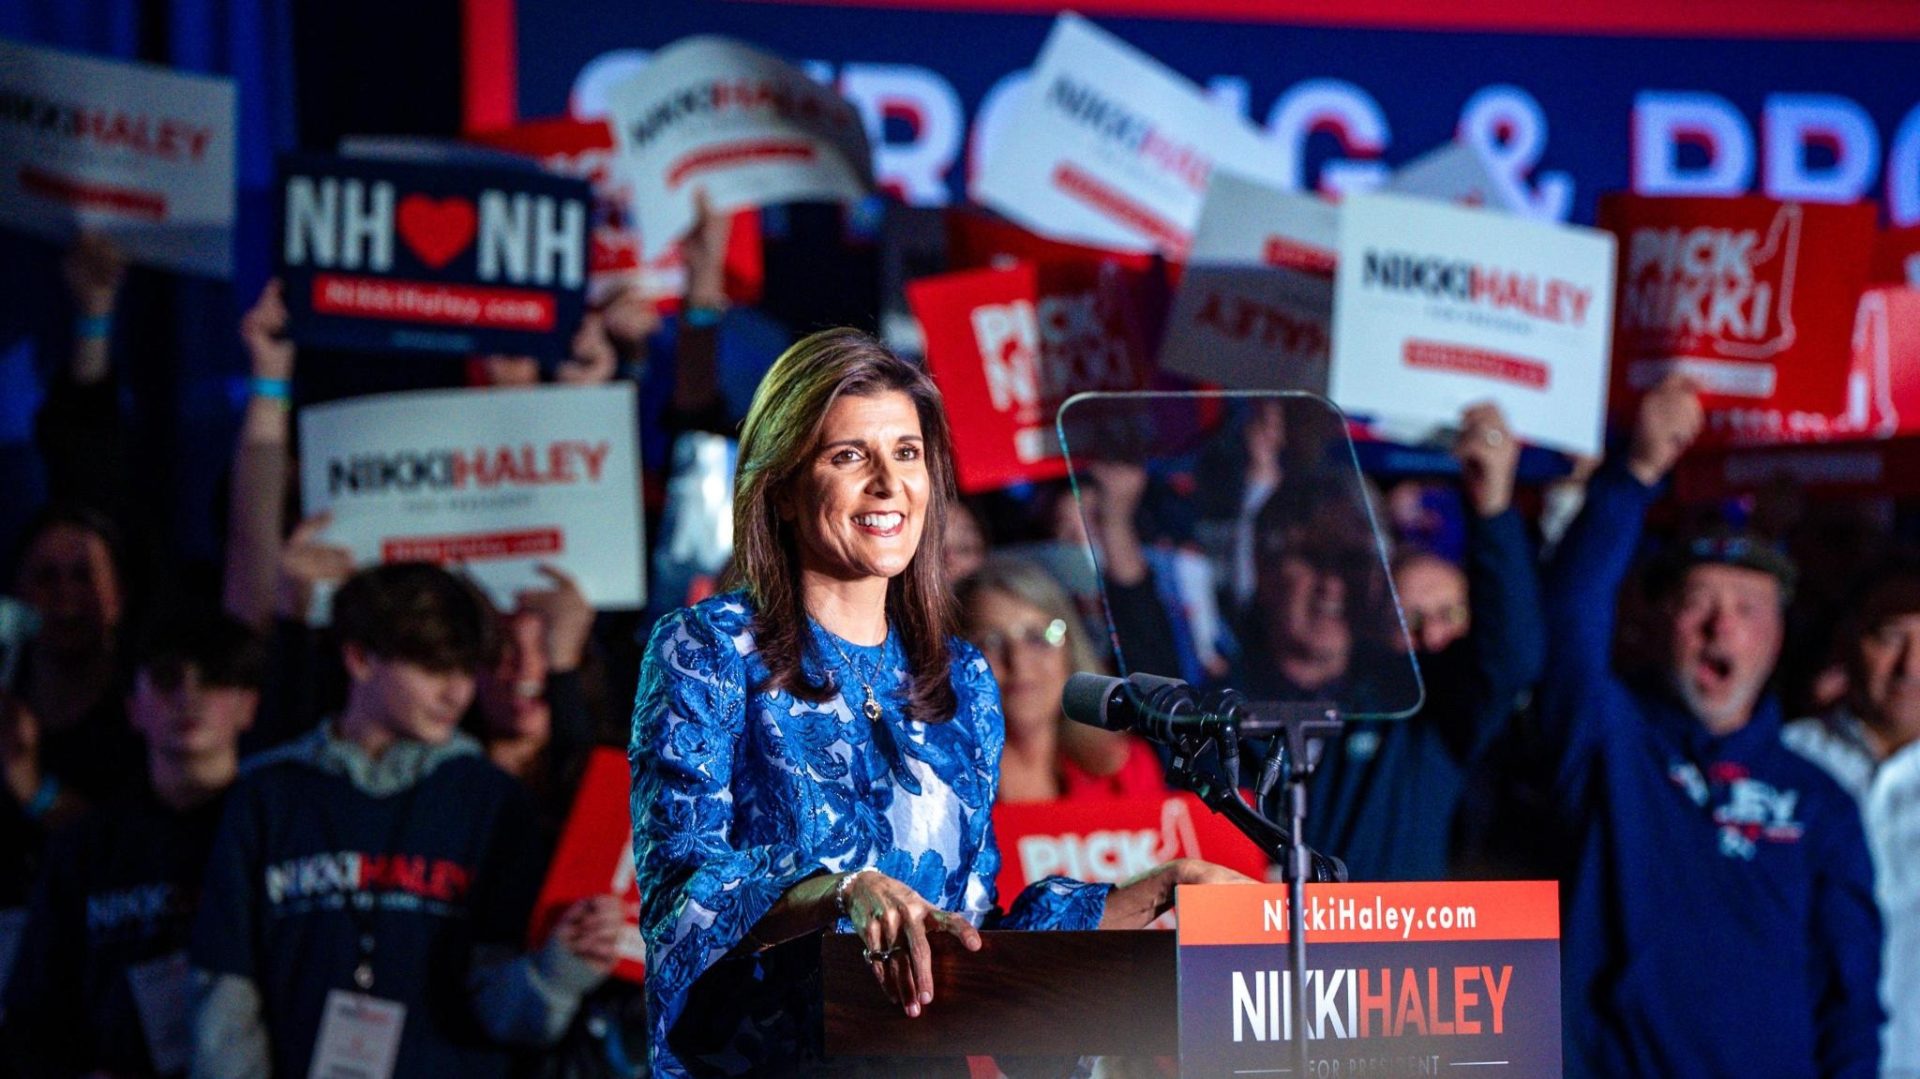 Nikki Haley speaking at a rally in the US state of New Hampshire, 24-1-24